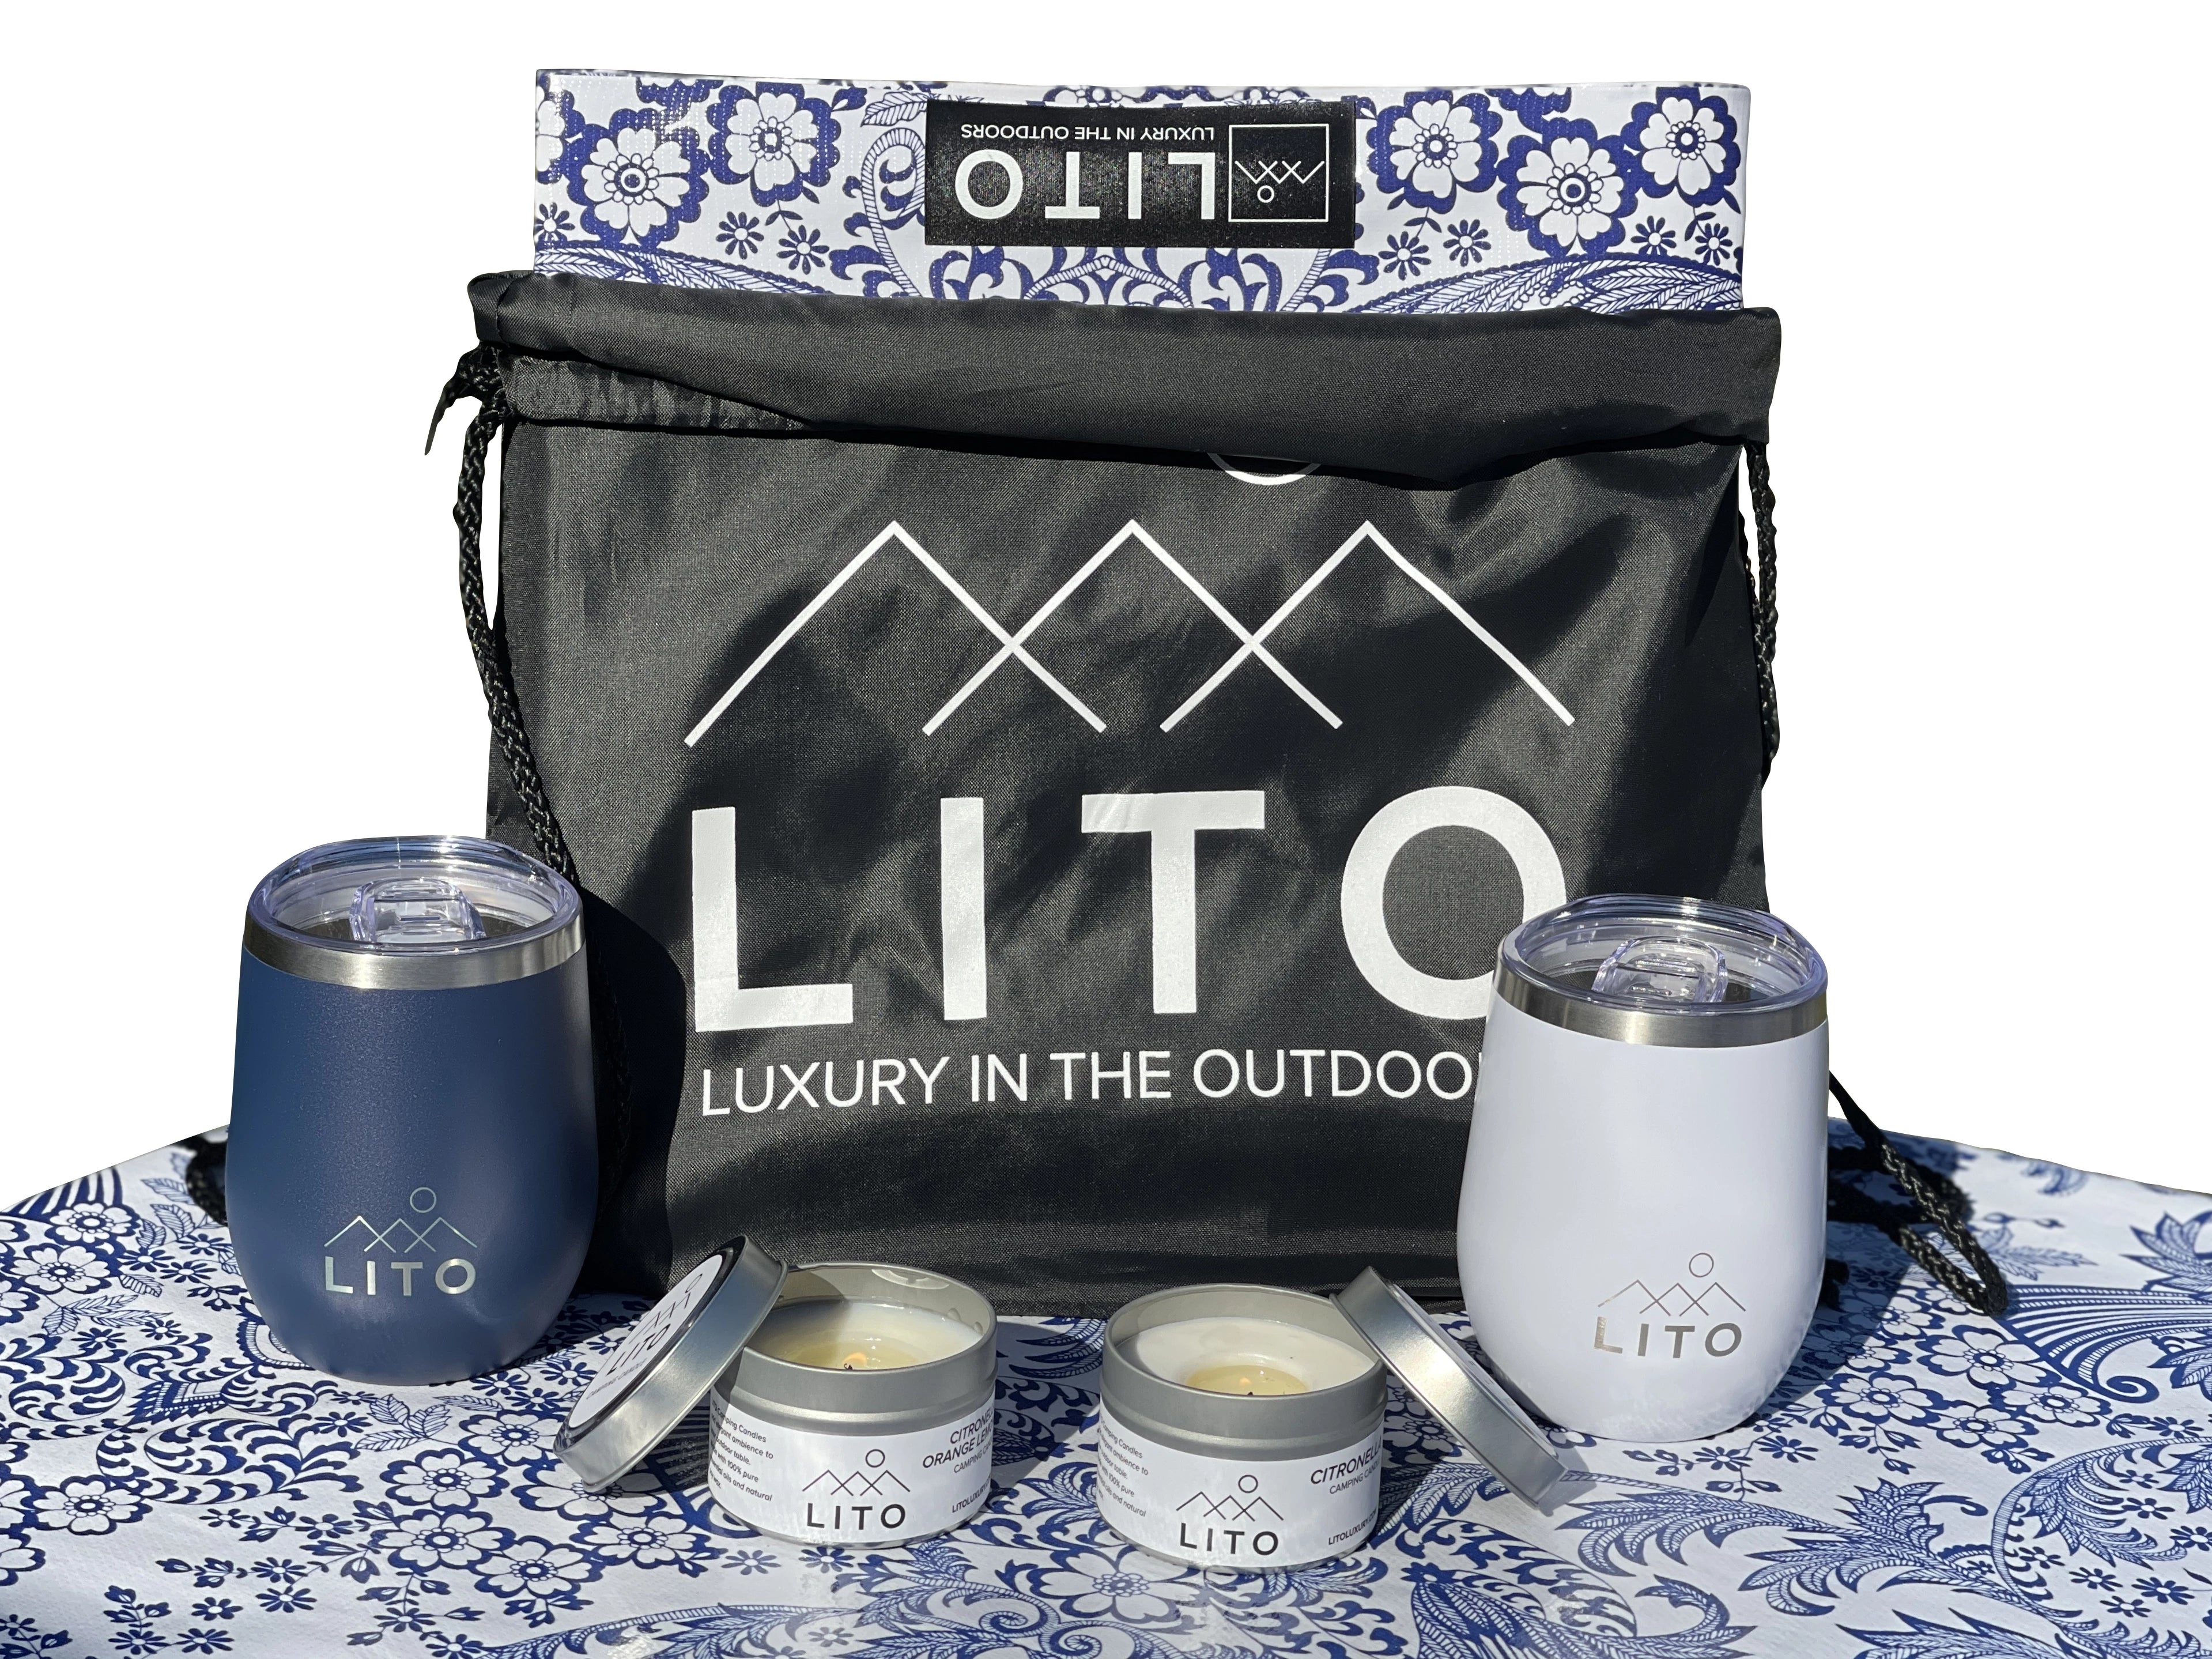 Create your own glamping accessories package, choose your favorite tablecloth, wine tumblers, candles, and solar fairy lights